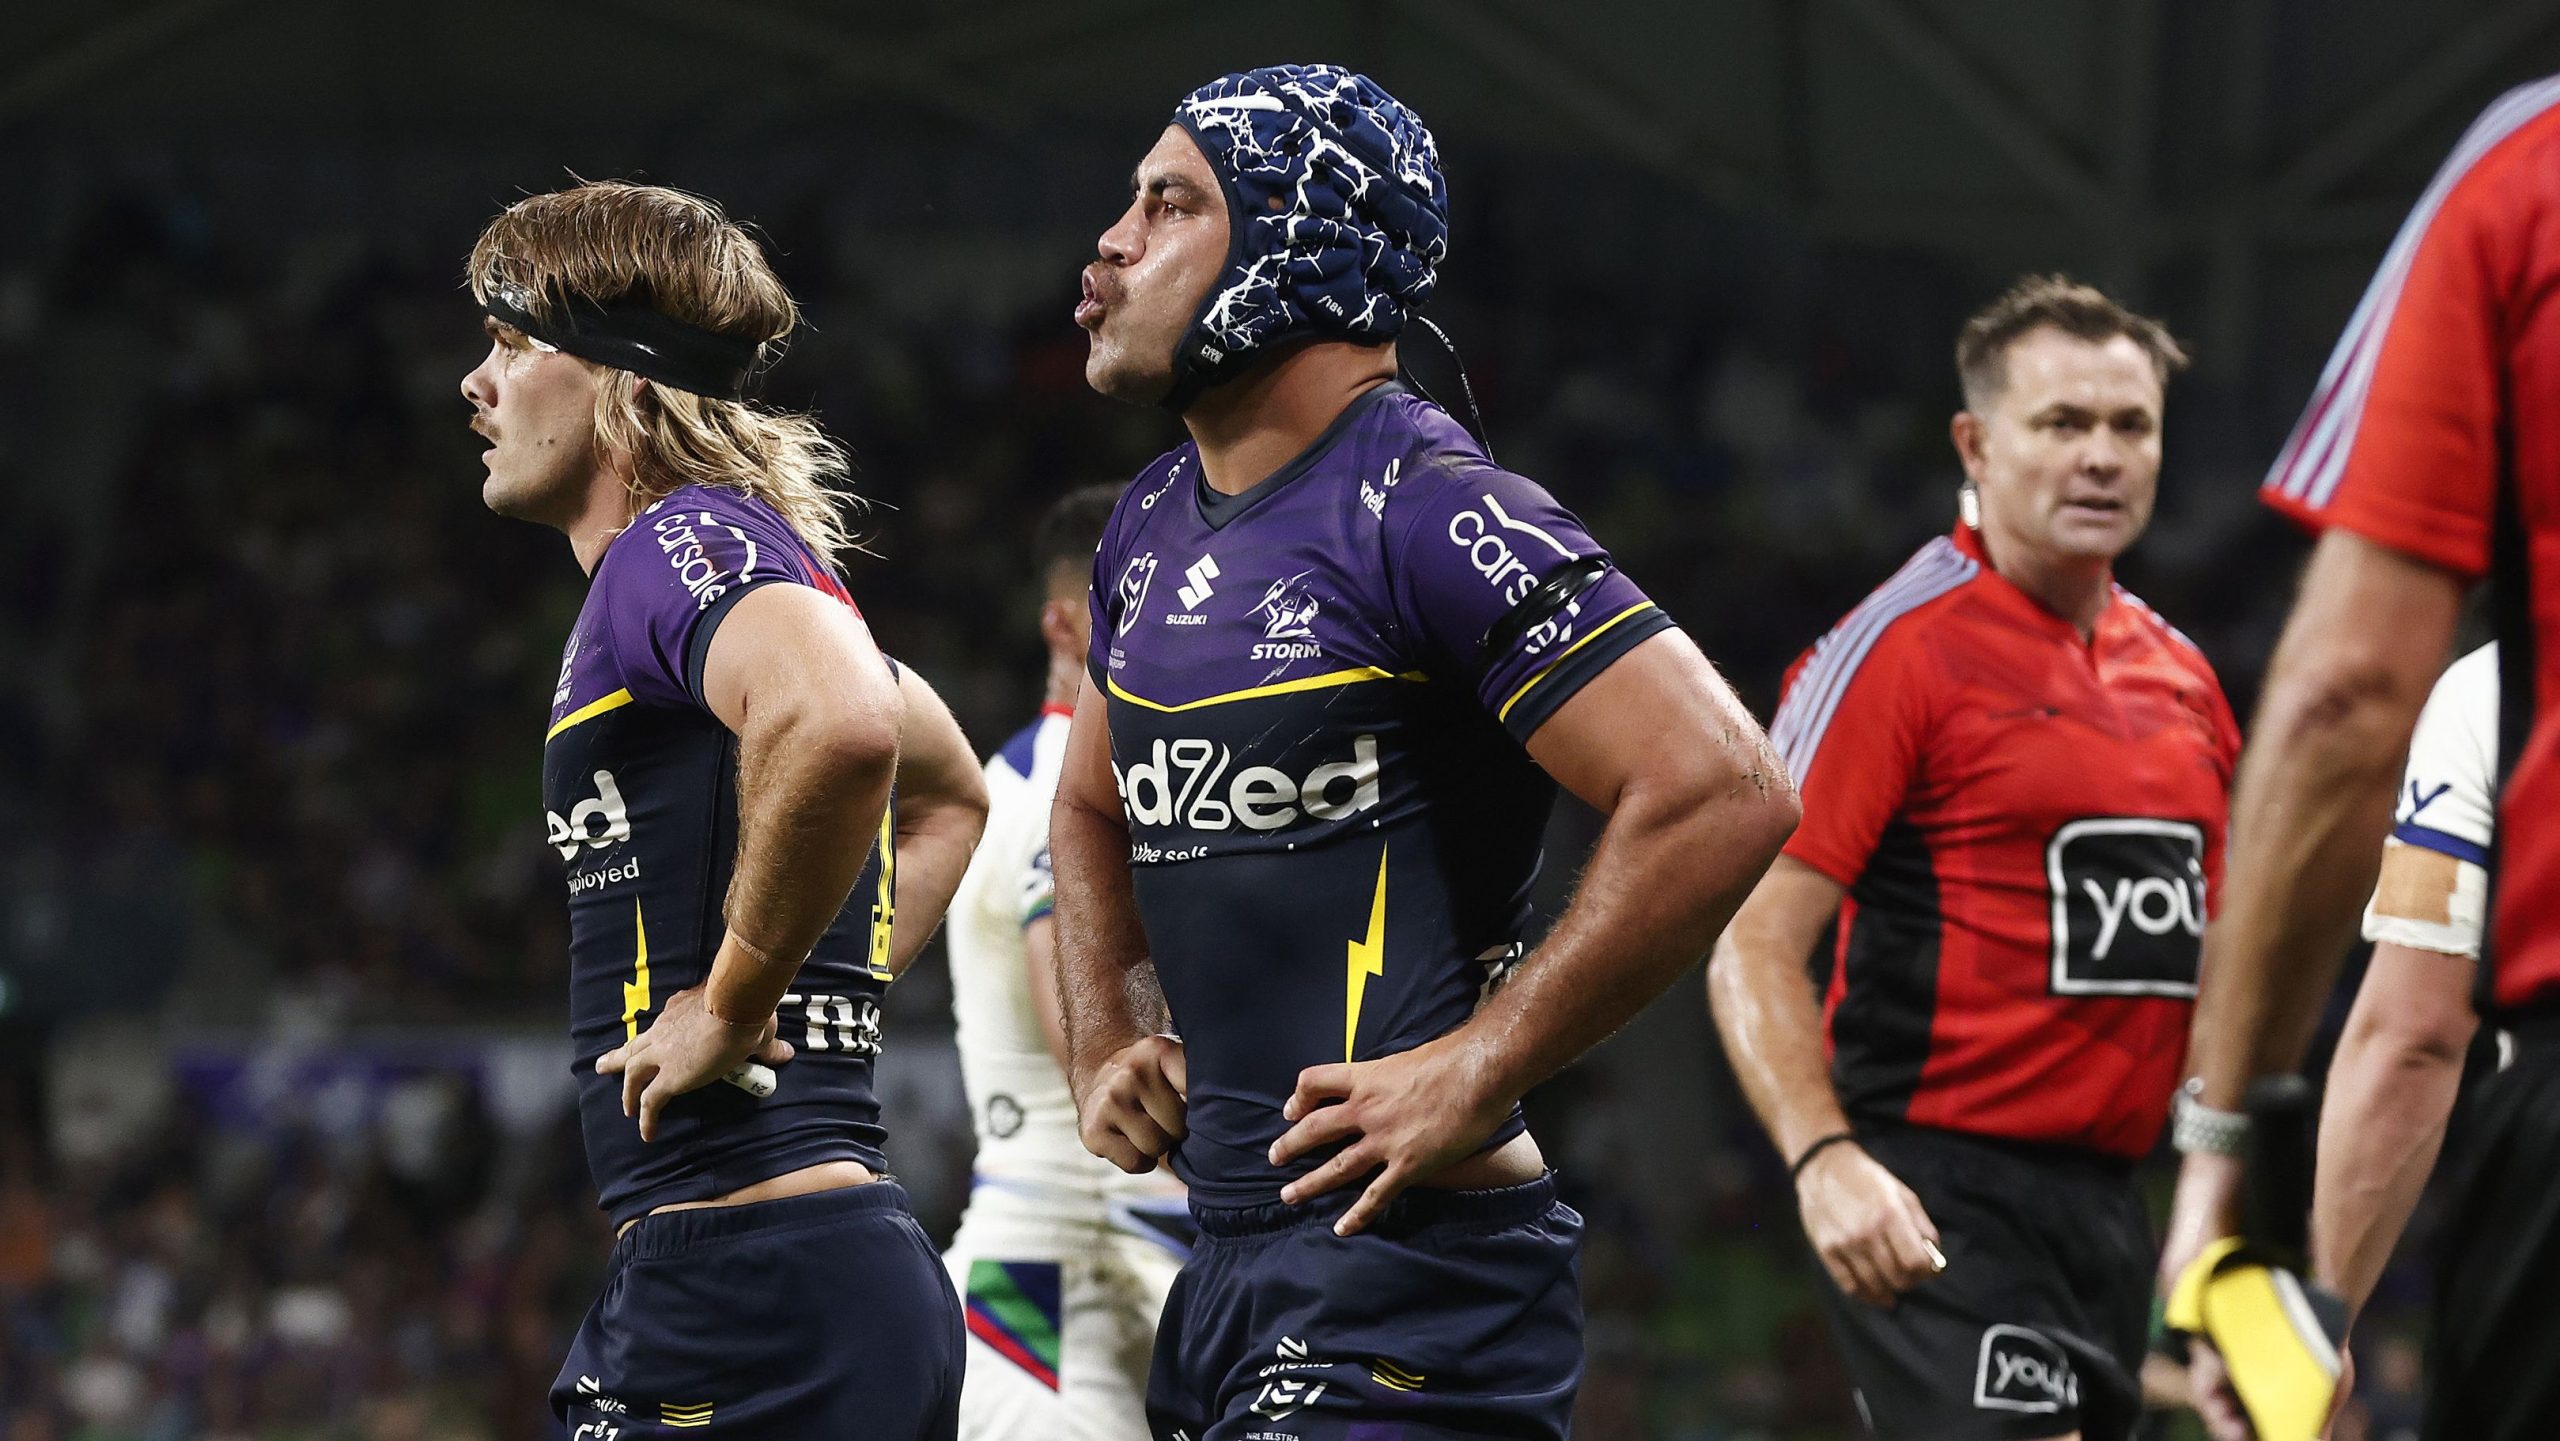 Storm halfback facing ban after referee incident